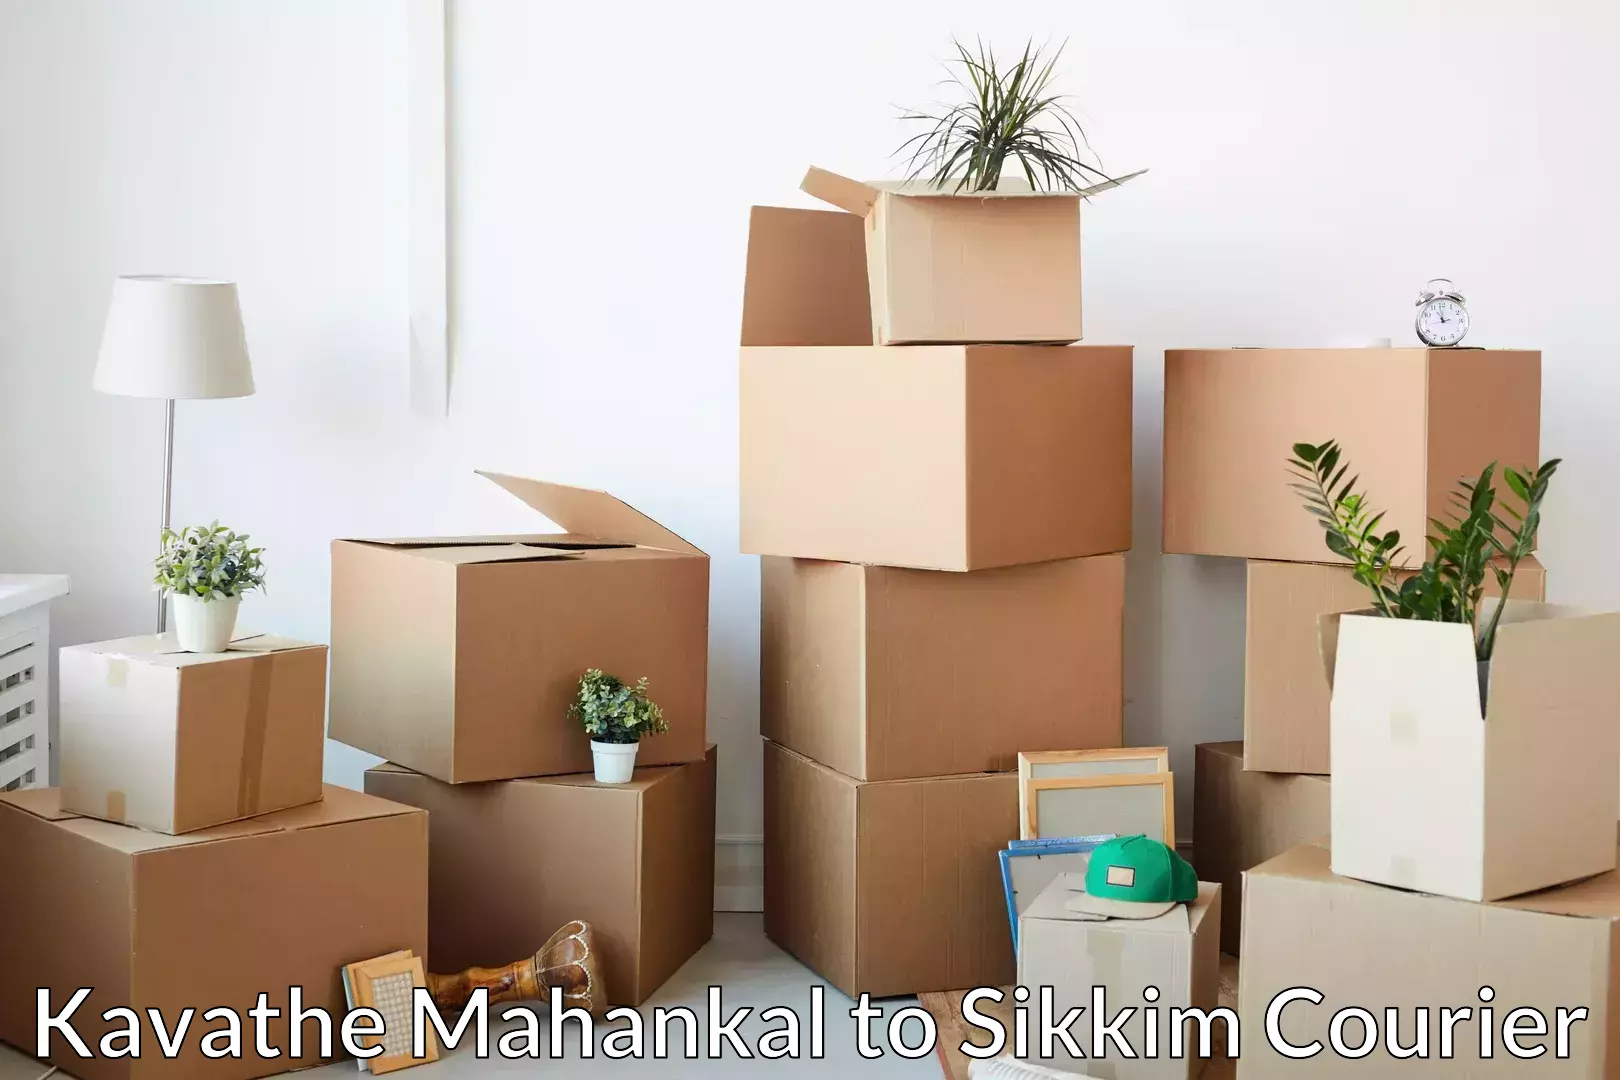 Professional packing and transport in Kavathe Mahankal to East Sikkim